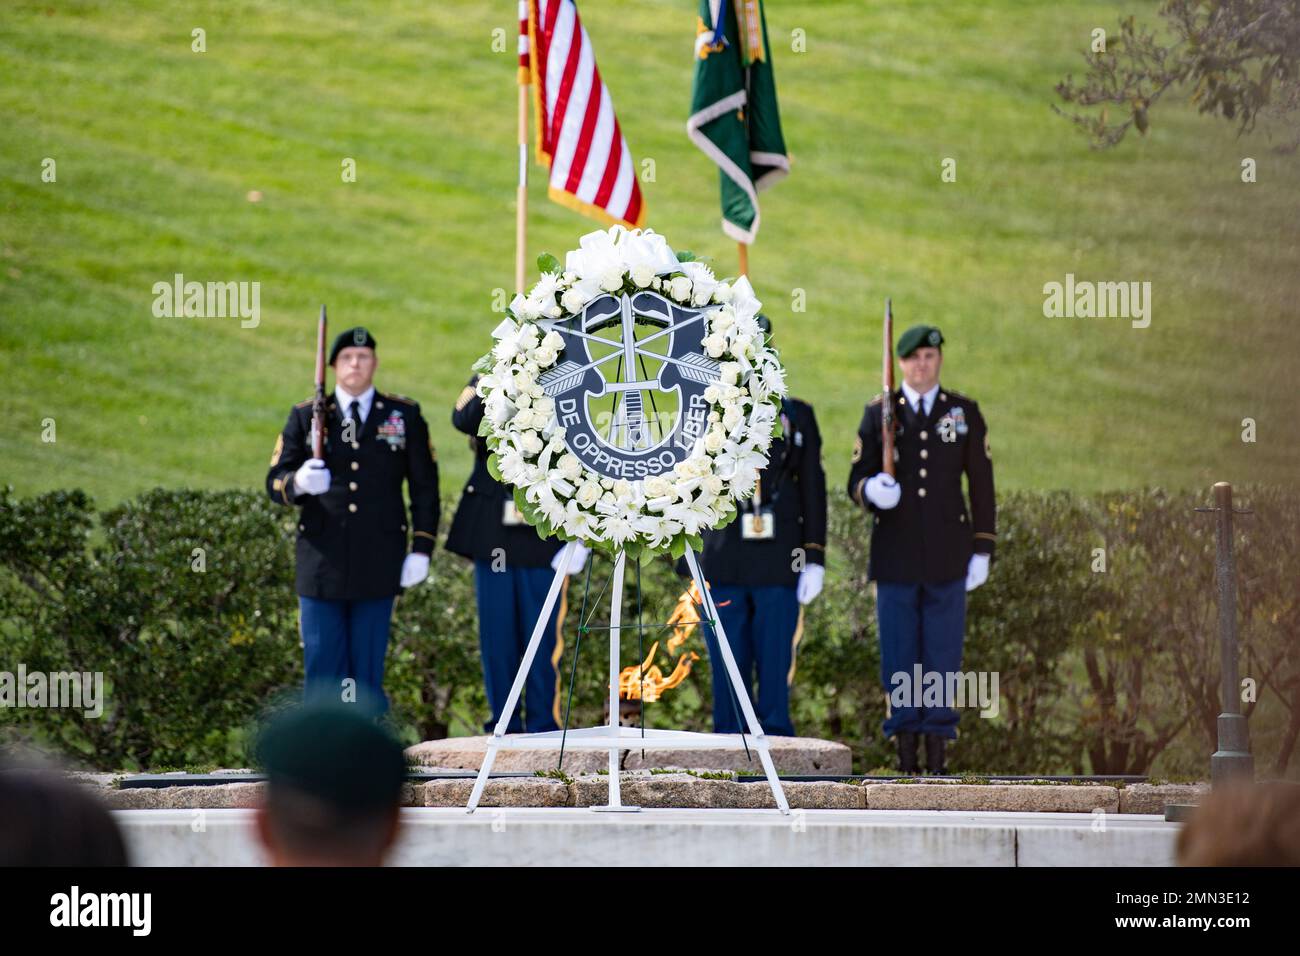 The 1st Special Forces Command (Airborne) hold a wreath-laying ceremony at the gravesite of President John F. Kennedy in Section 45 of Arlington National Cemetery, Arlington, Virginia, Sept. 27, 2022. This ceremony is held yearly to commemorate President Kennedy’s contributions to the U.S. Army Special Forces, including authorizing the “Green Beret” as the official headgear for all U.S. Army Special Forces and his uncompromising support to the regiment. Stock Photo